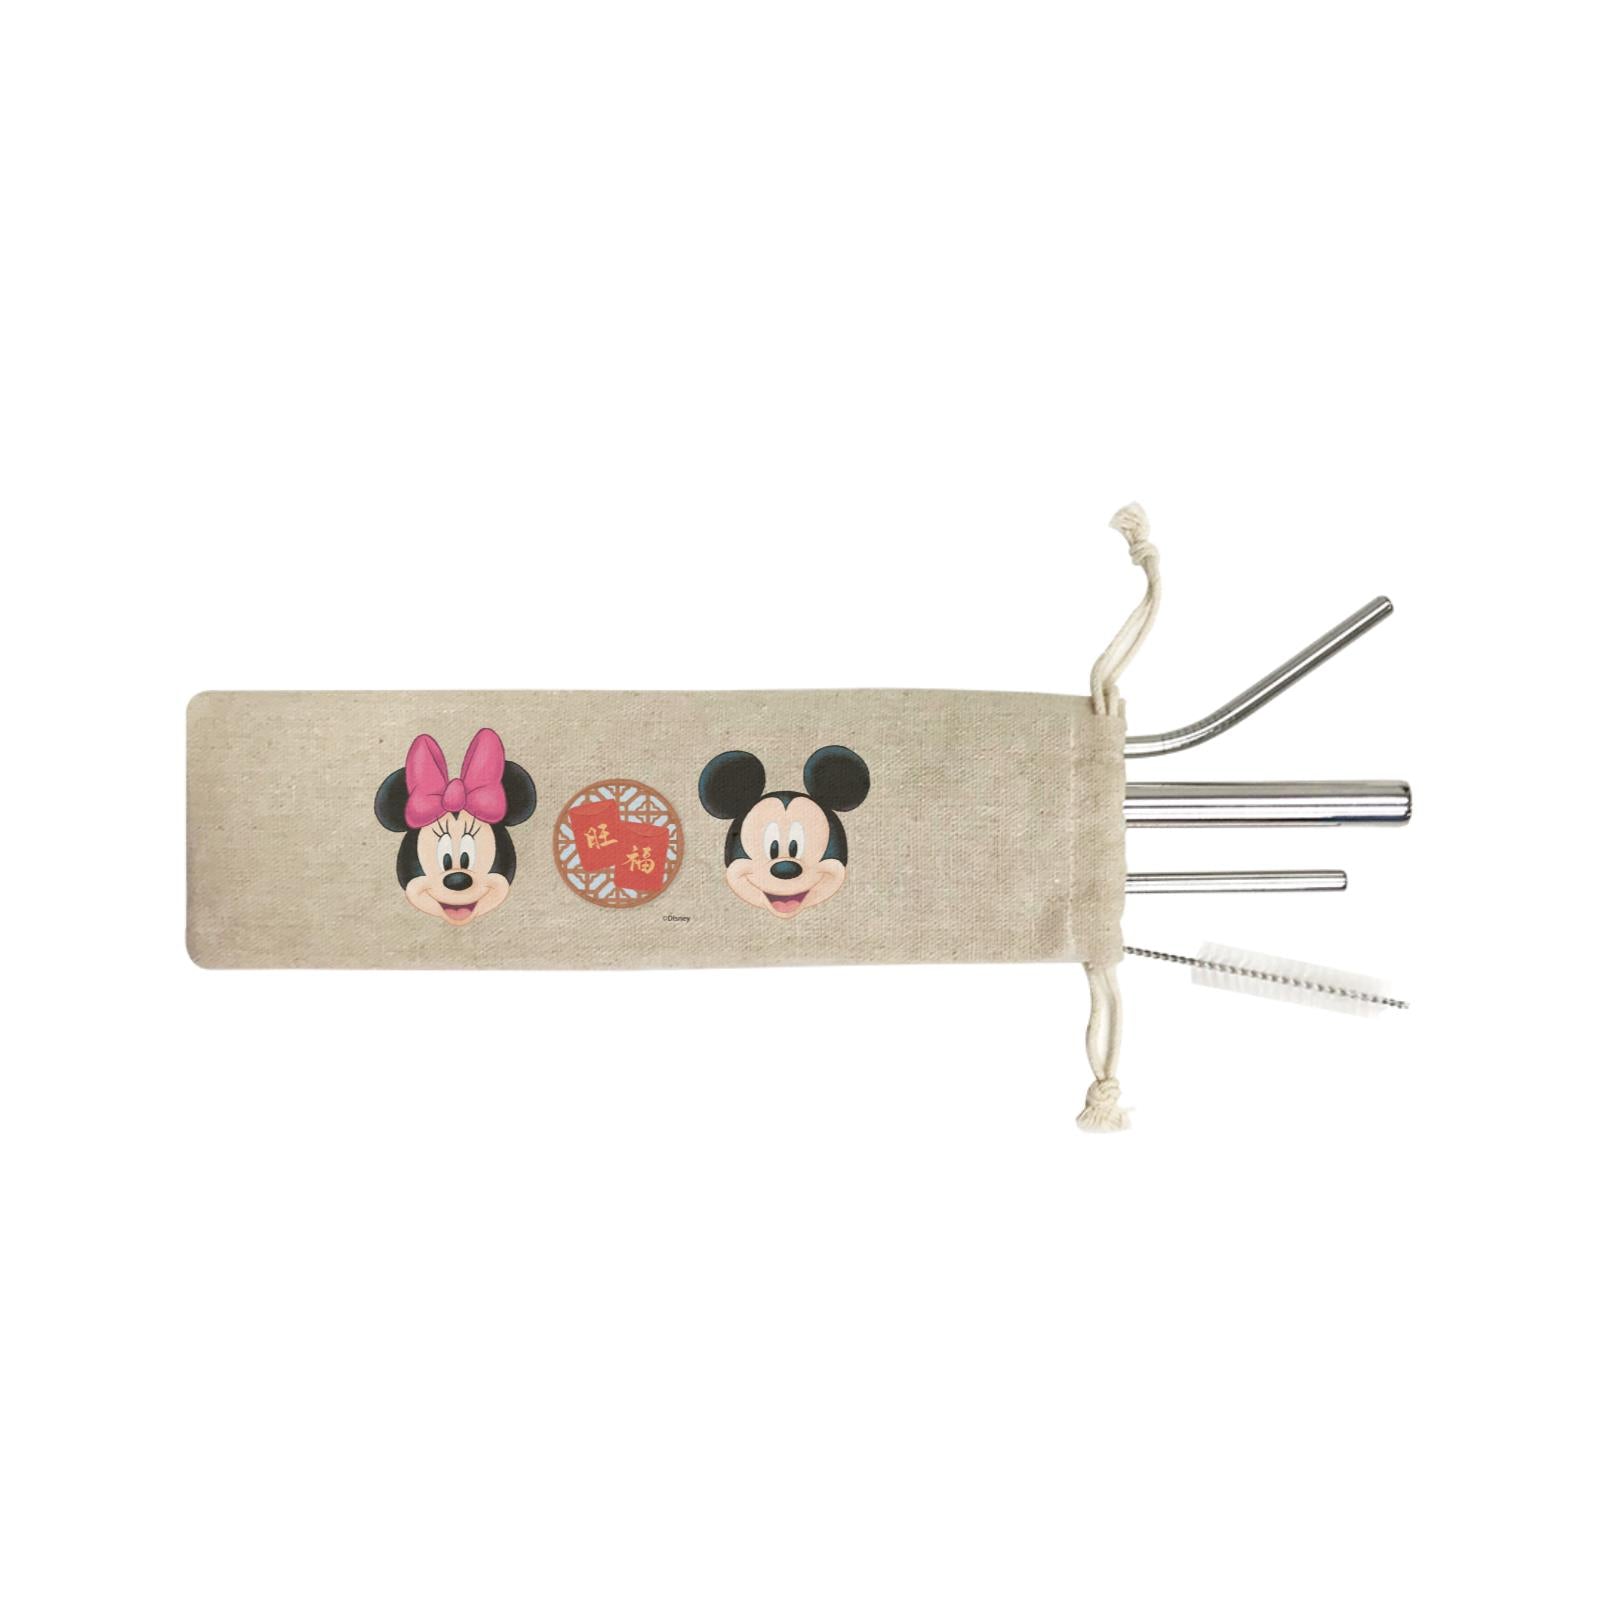 Disney CNY Mickey and Minnie With Prosperity Elements Non Personalised SB 4-in-1 Stainless Steel Straw Set In a Satchel